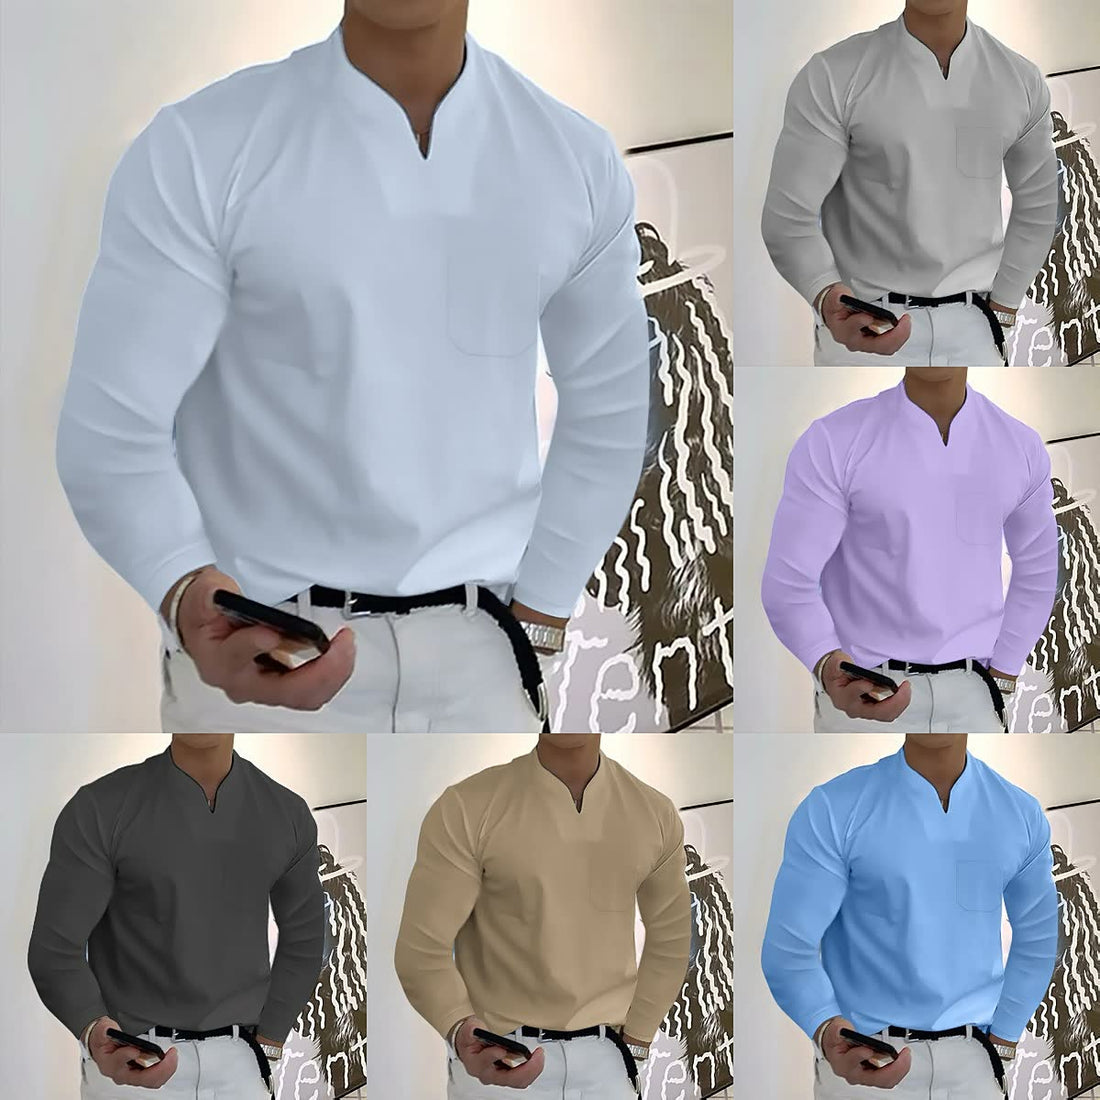 ✨New Arrival Sale - 49% OFF Men's Casual Solid Color Long Sleeve Cotton T-Shirt With Pocket